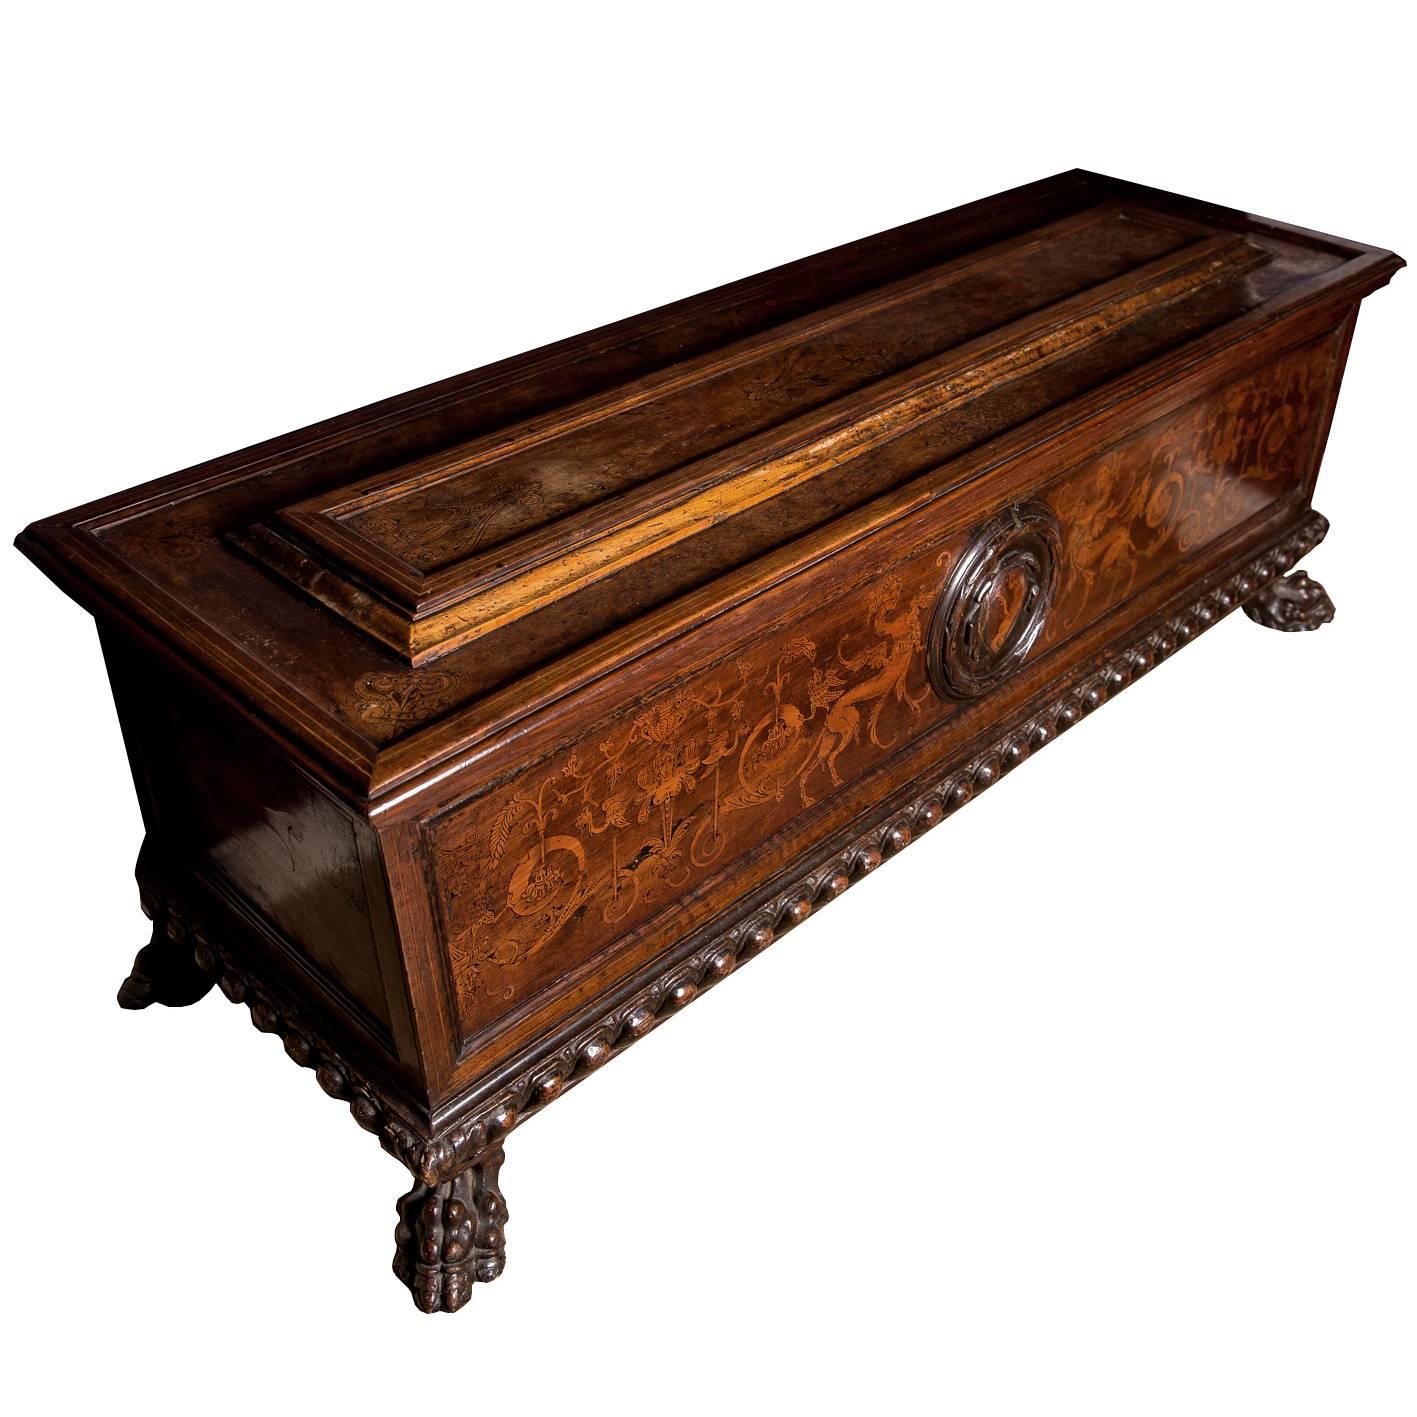 Italian Baroque Walnut Cassone Inlaid with Engraved Fruitwood Marquetry, 17th C For Sale 1